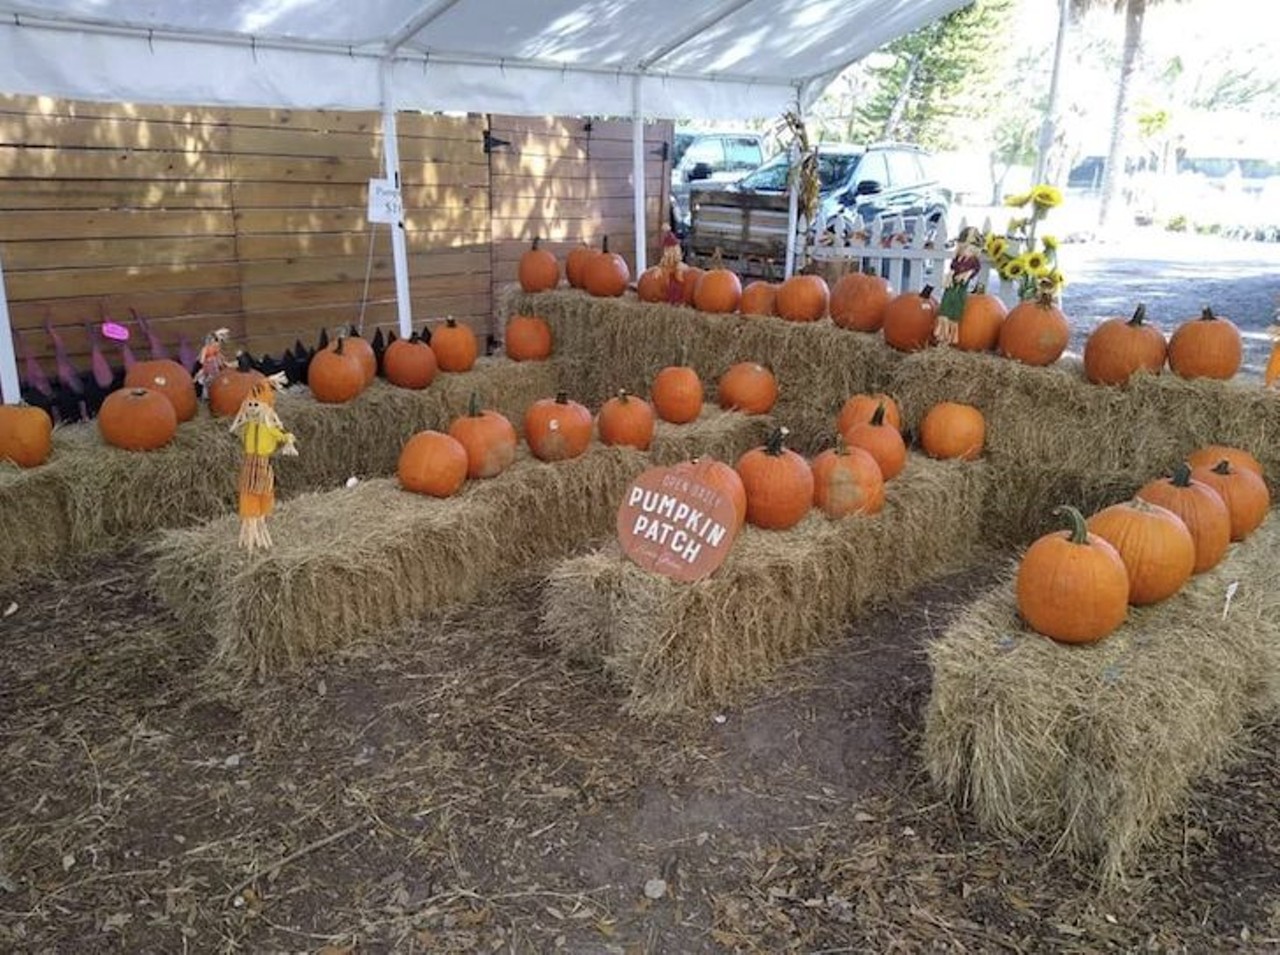 Fall Farm Festival
1750 Lake Ave. SE, Largo
Dates: Saturday and Sunday, Oct. 9-Oct. 30
DK Landscaping&#146;s Fall Farm Festival includes hayrides, pumpkin patch, crafts, yard games, bounce house, barrel train ride, plus fresh eggs to purchase. Anyone under 30 inches is free to get in&#151;it&#146;s $10 for everyone else.